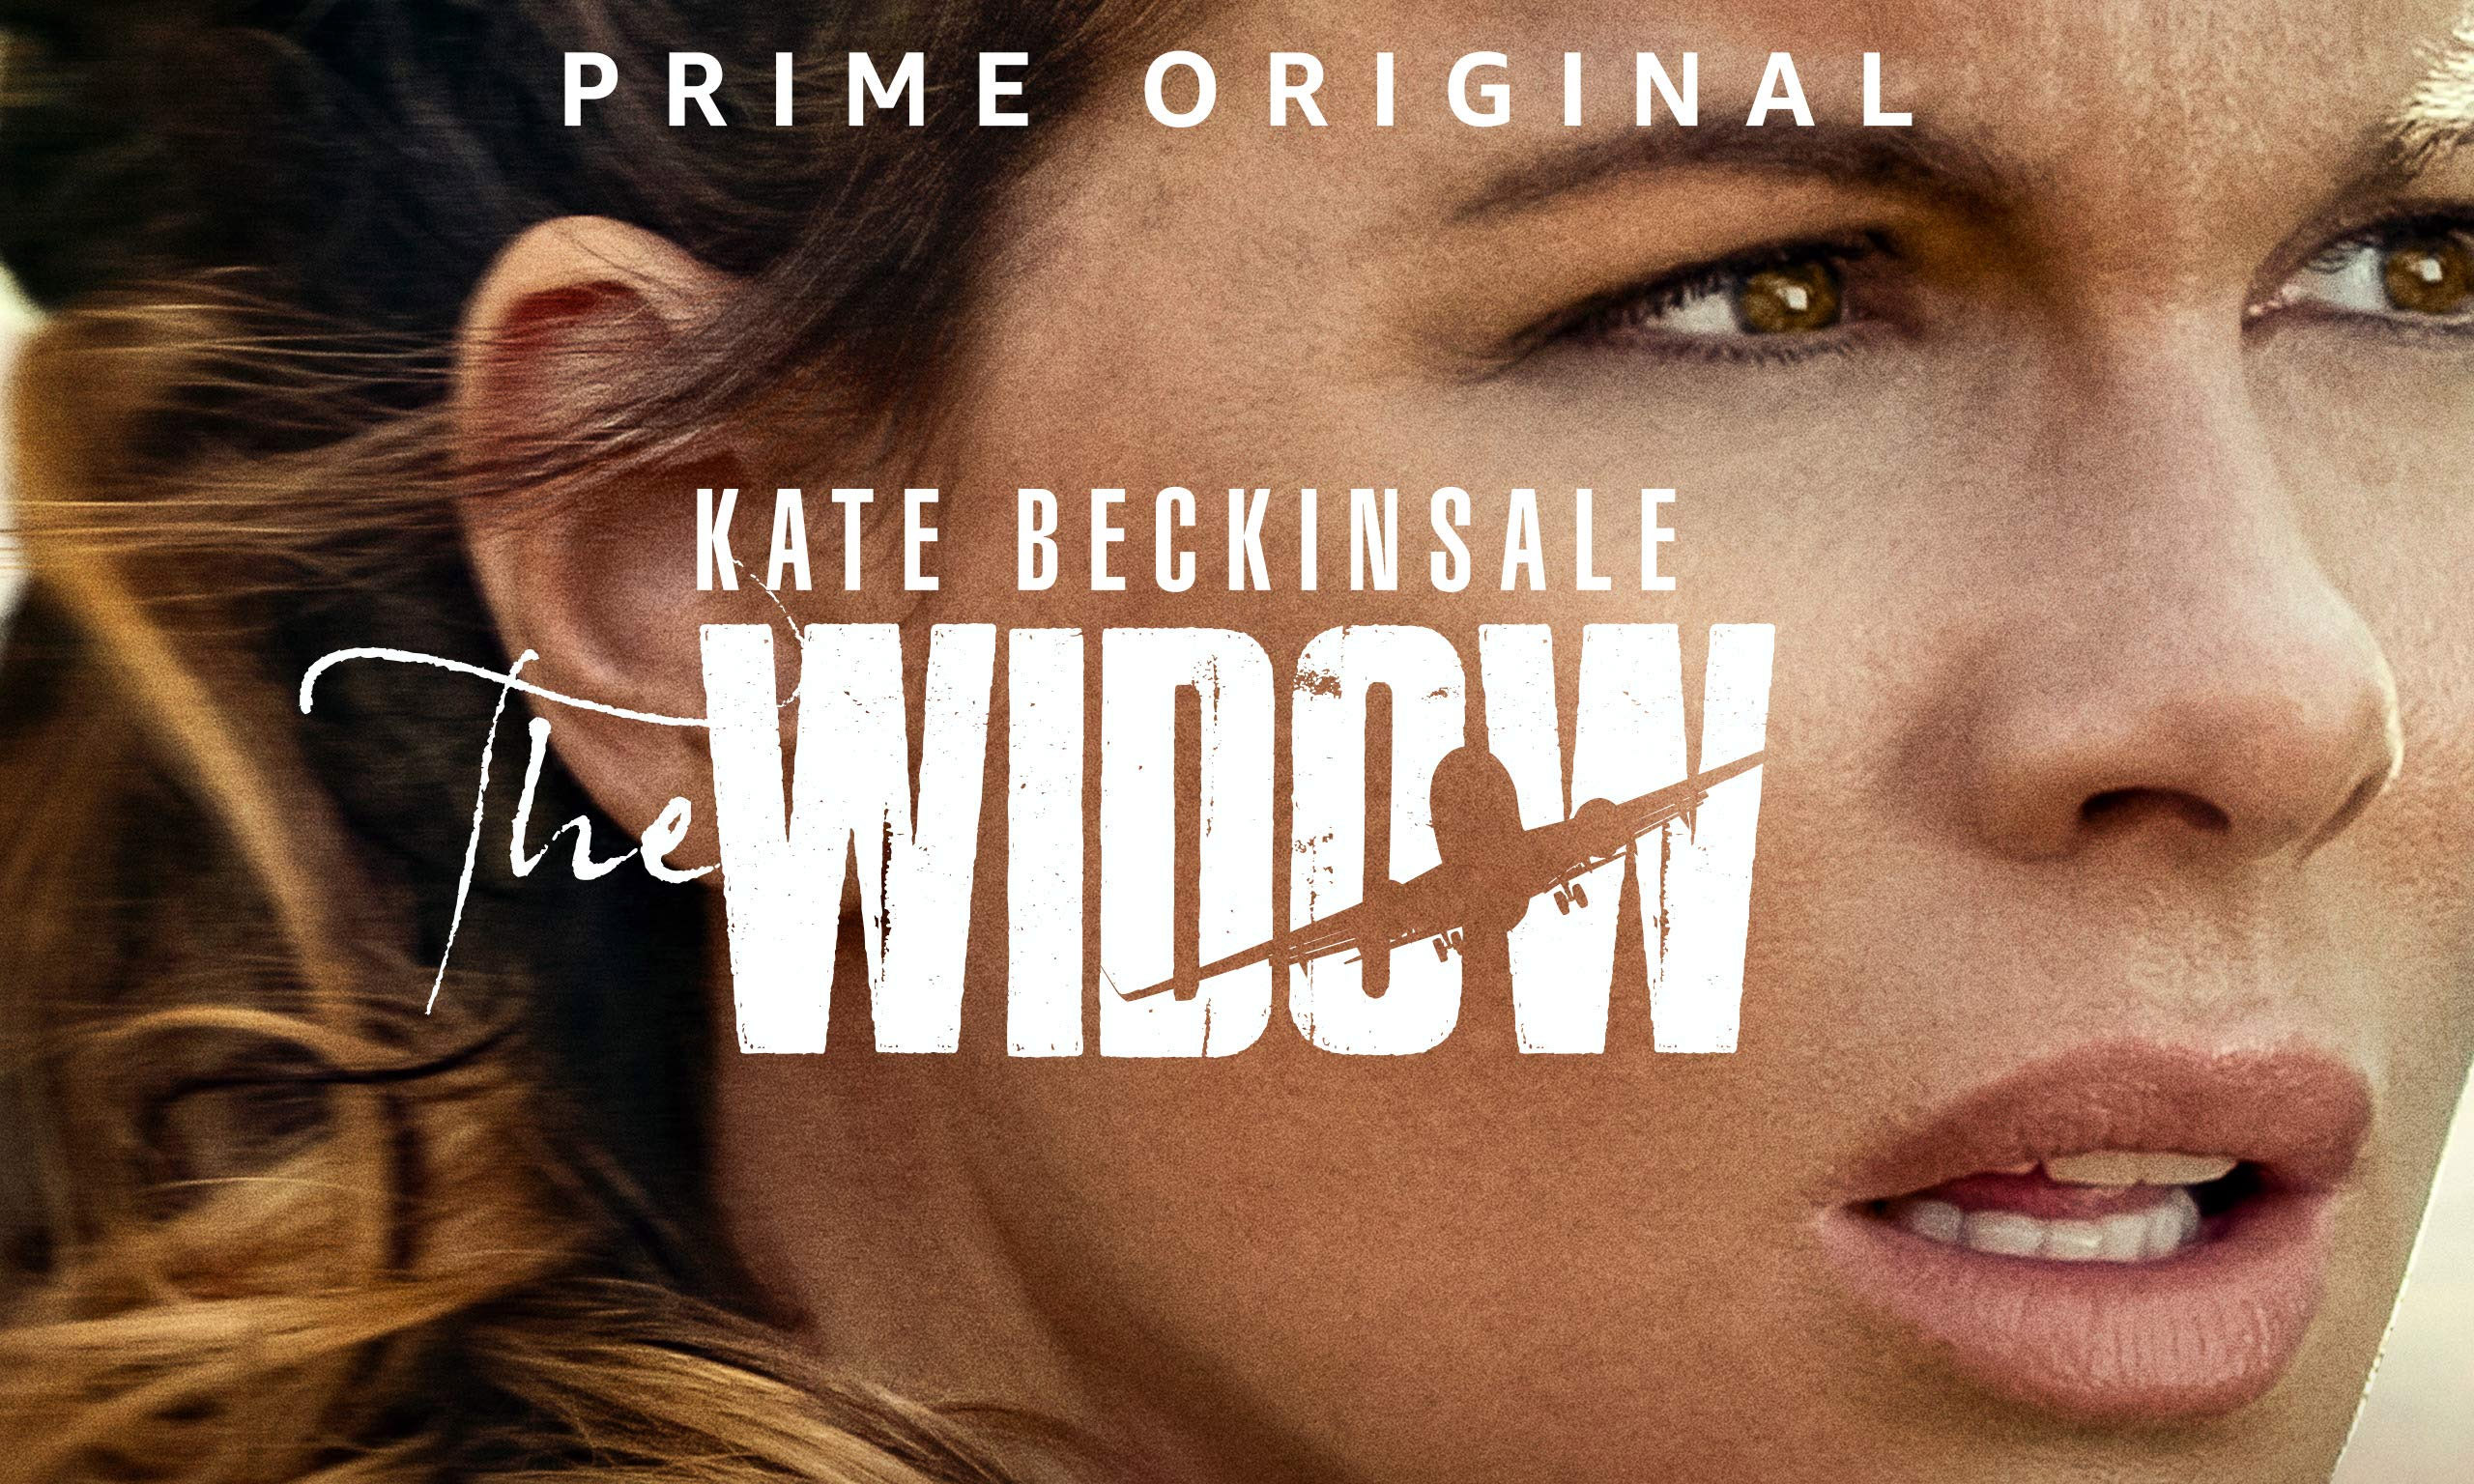 What’s New On Amazon Prime Video In March 'The Widow' Starring Kate